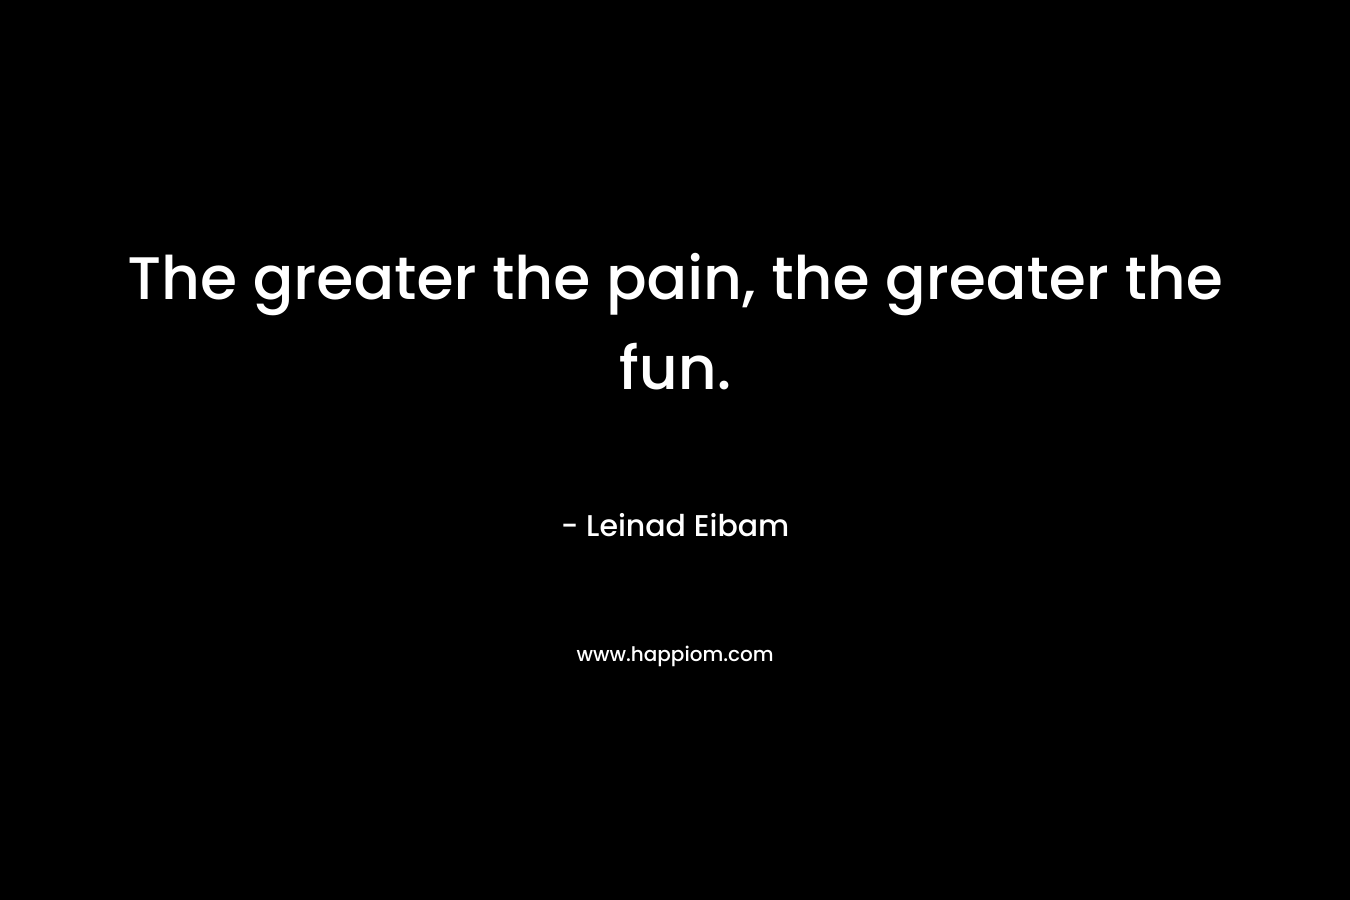 The greater the pain, the greater the fun.